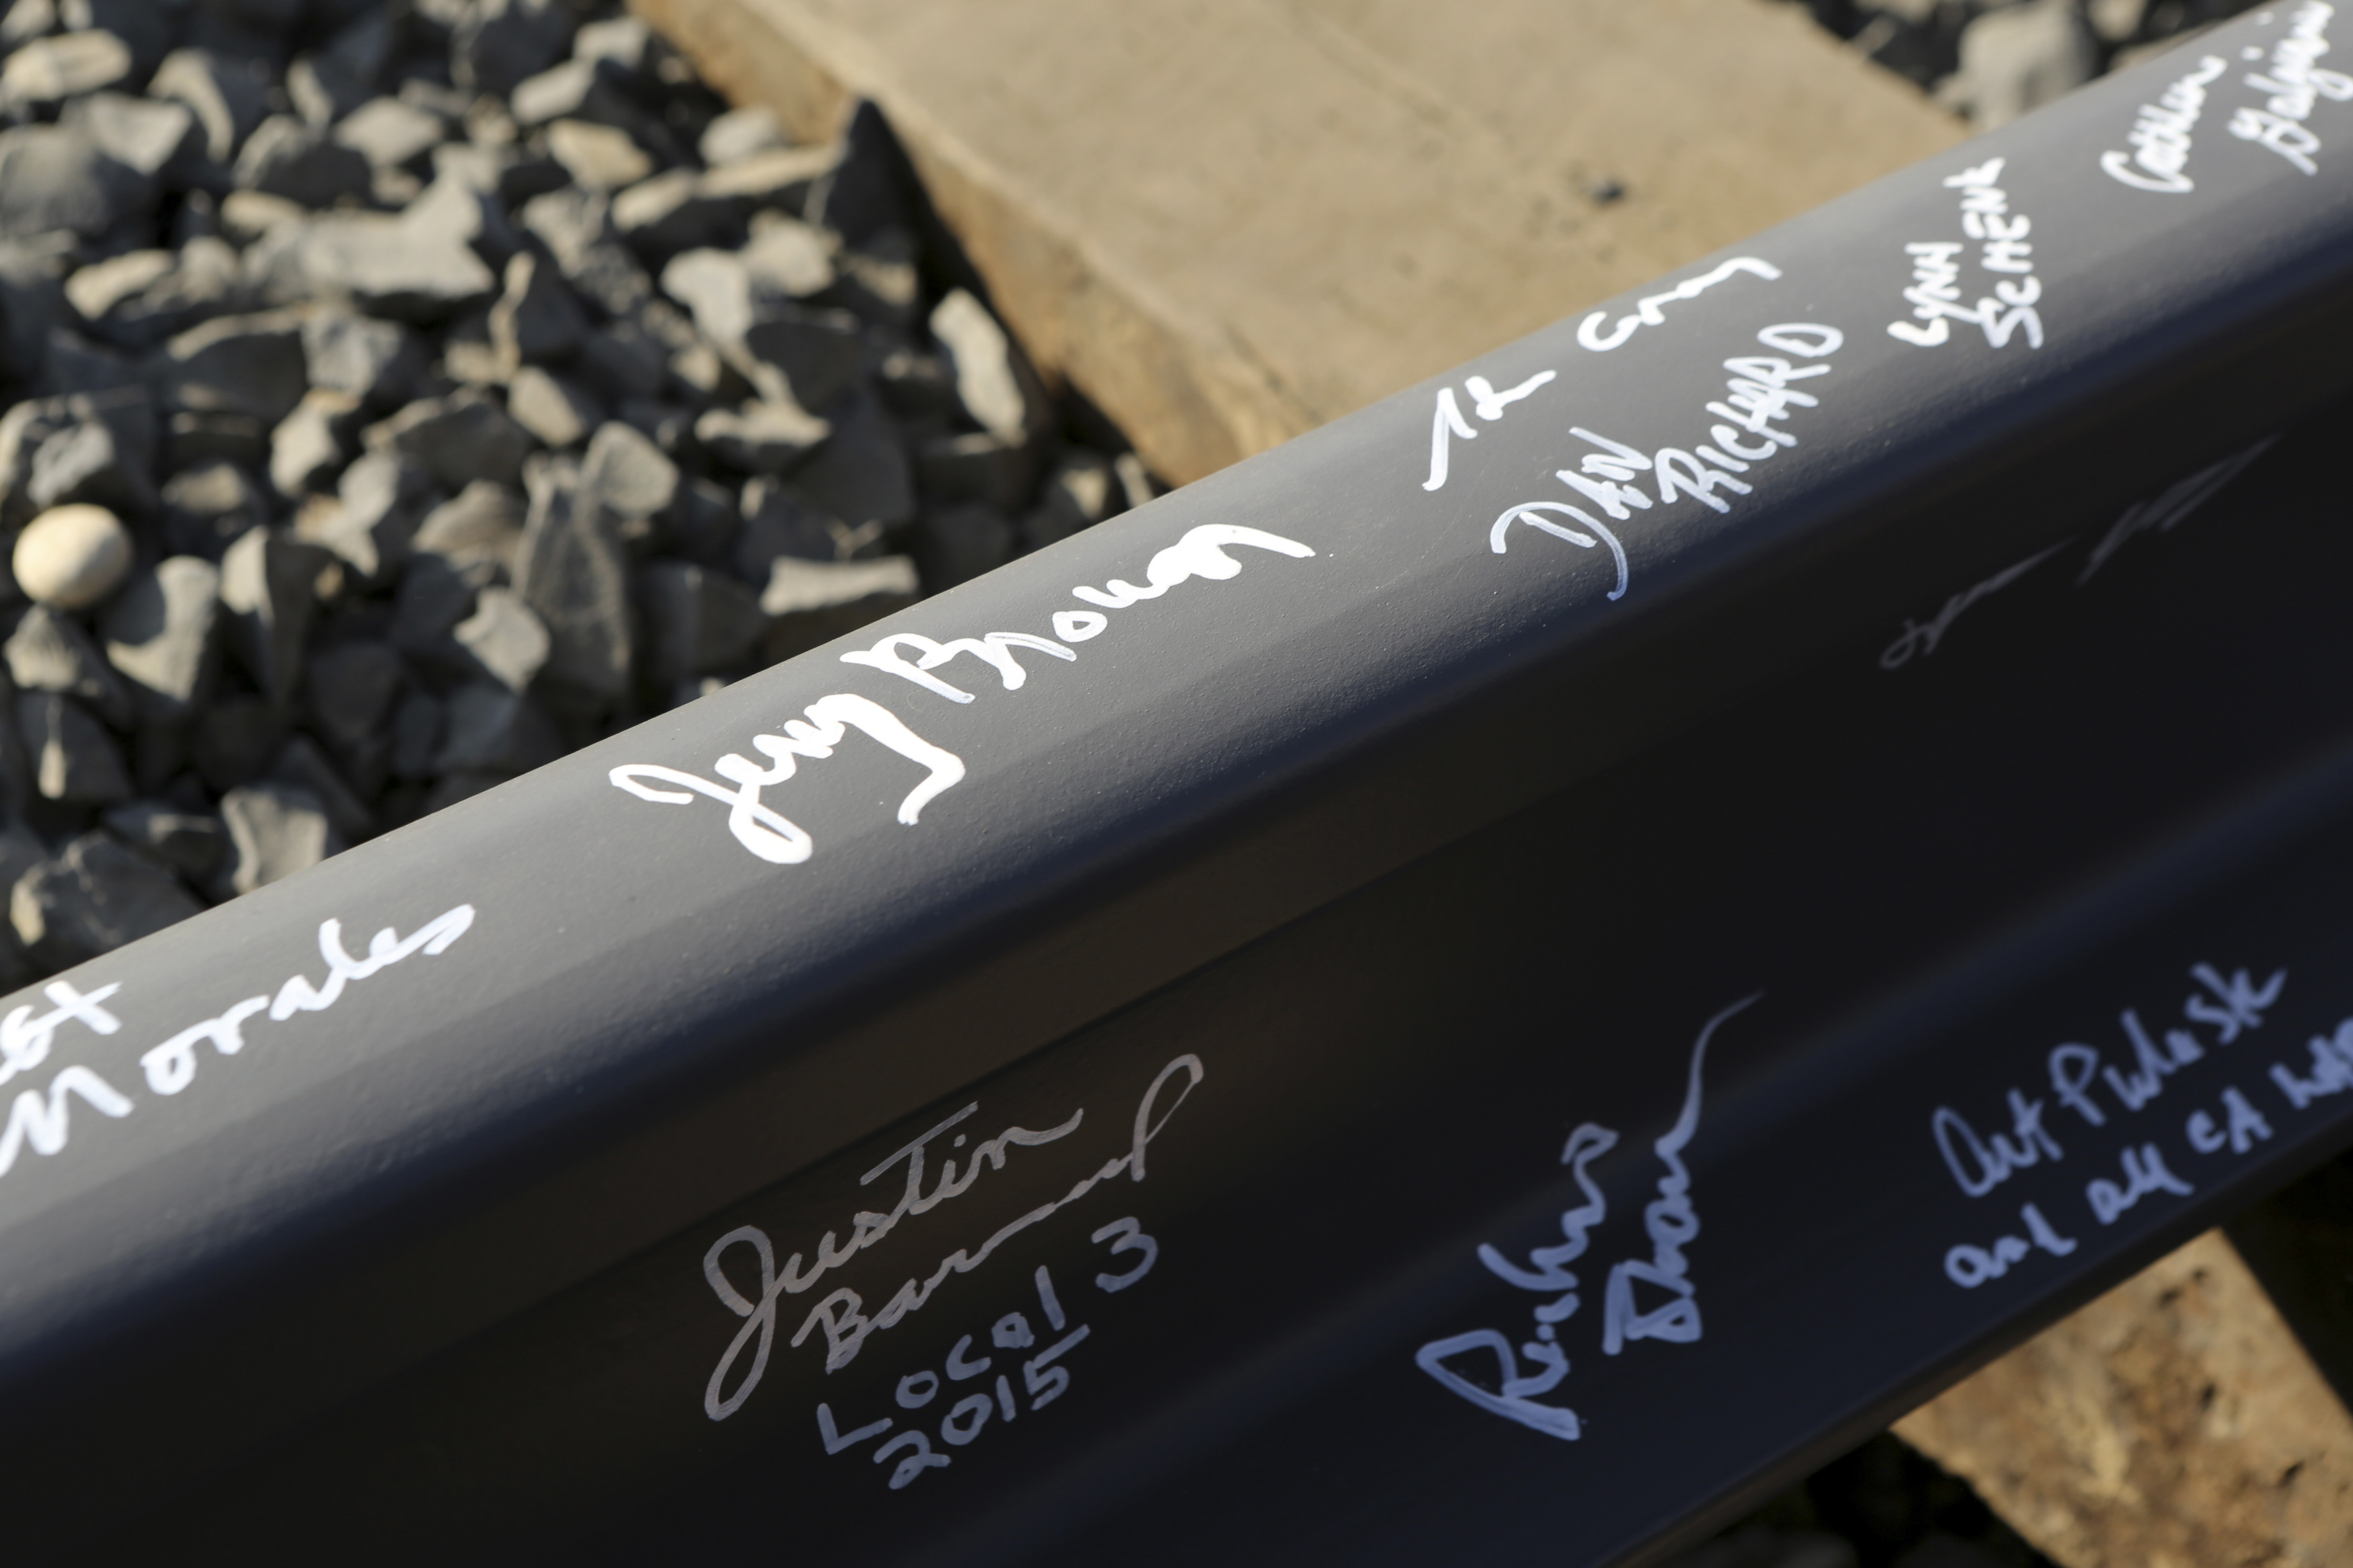 California Governor Brown's name and others are pictured on a railroad rail after a ceremony for the California High Speed Rail in Fresno